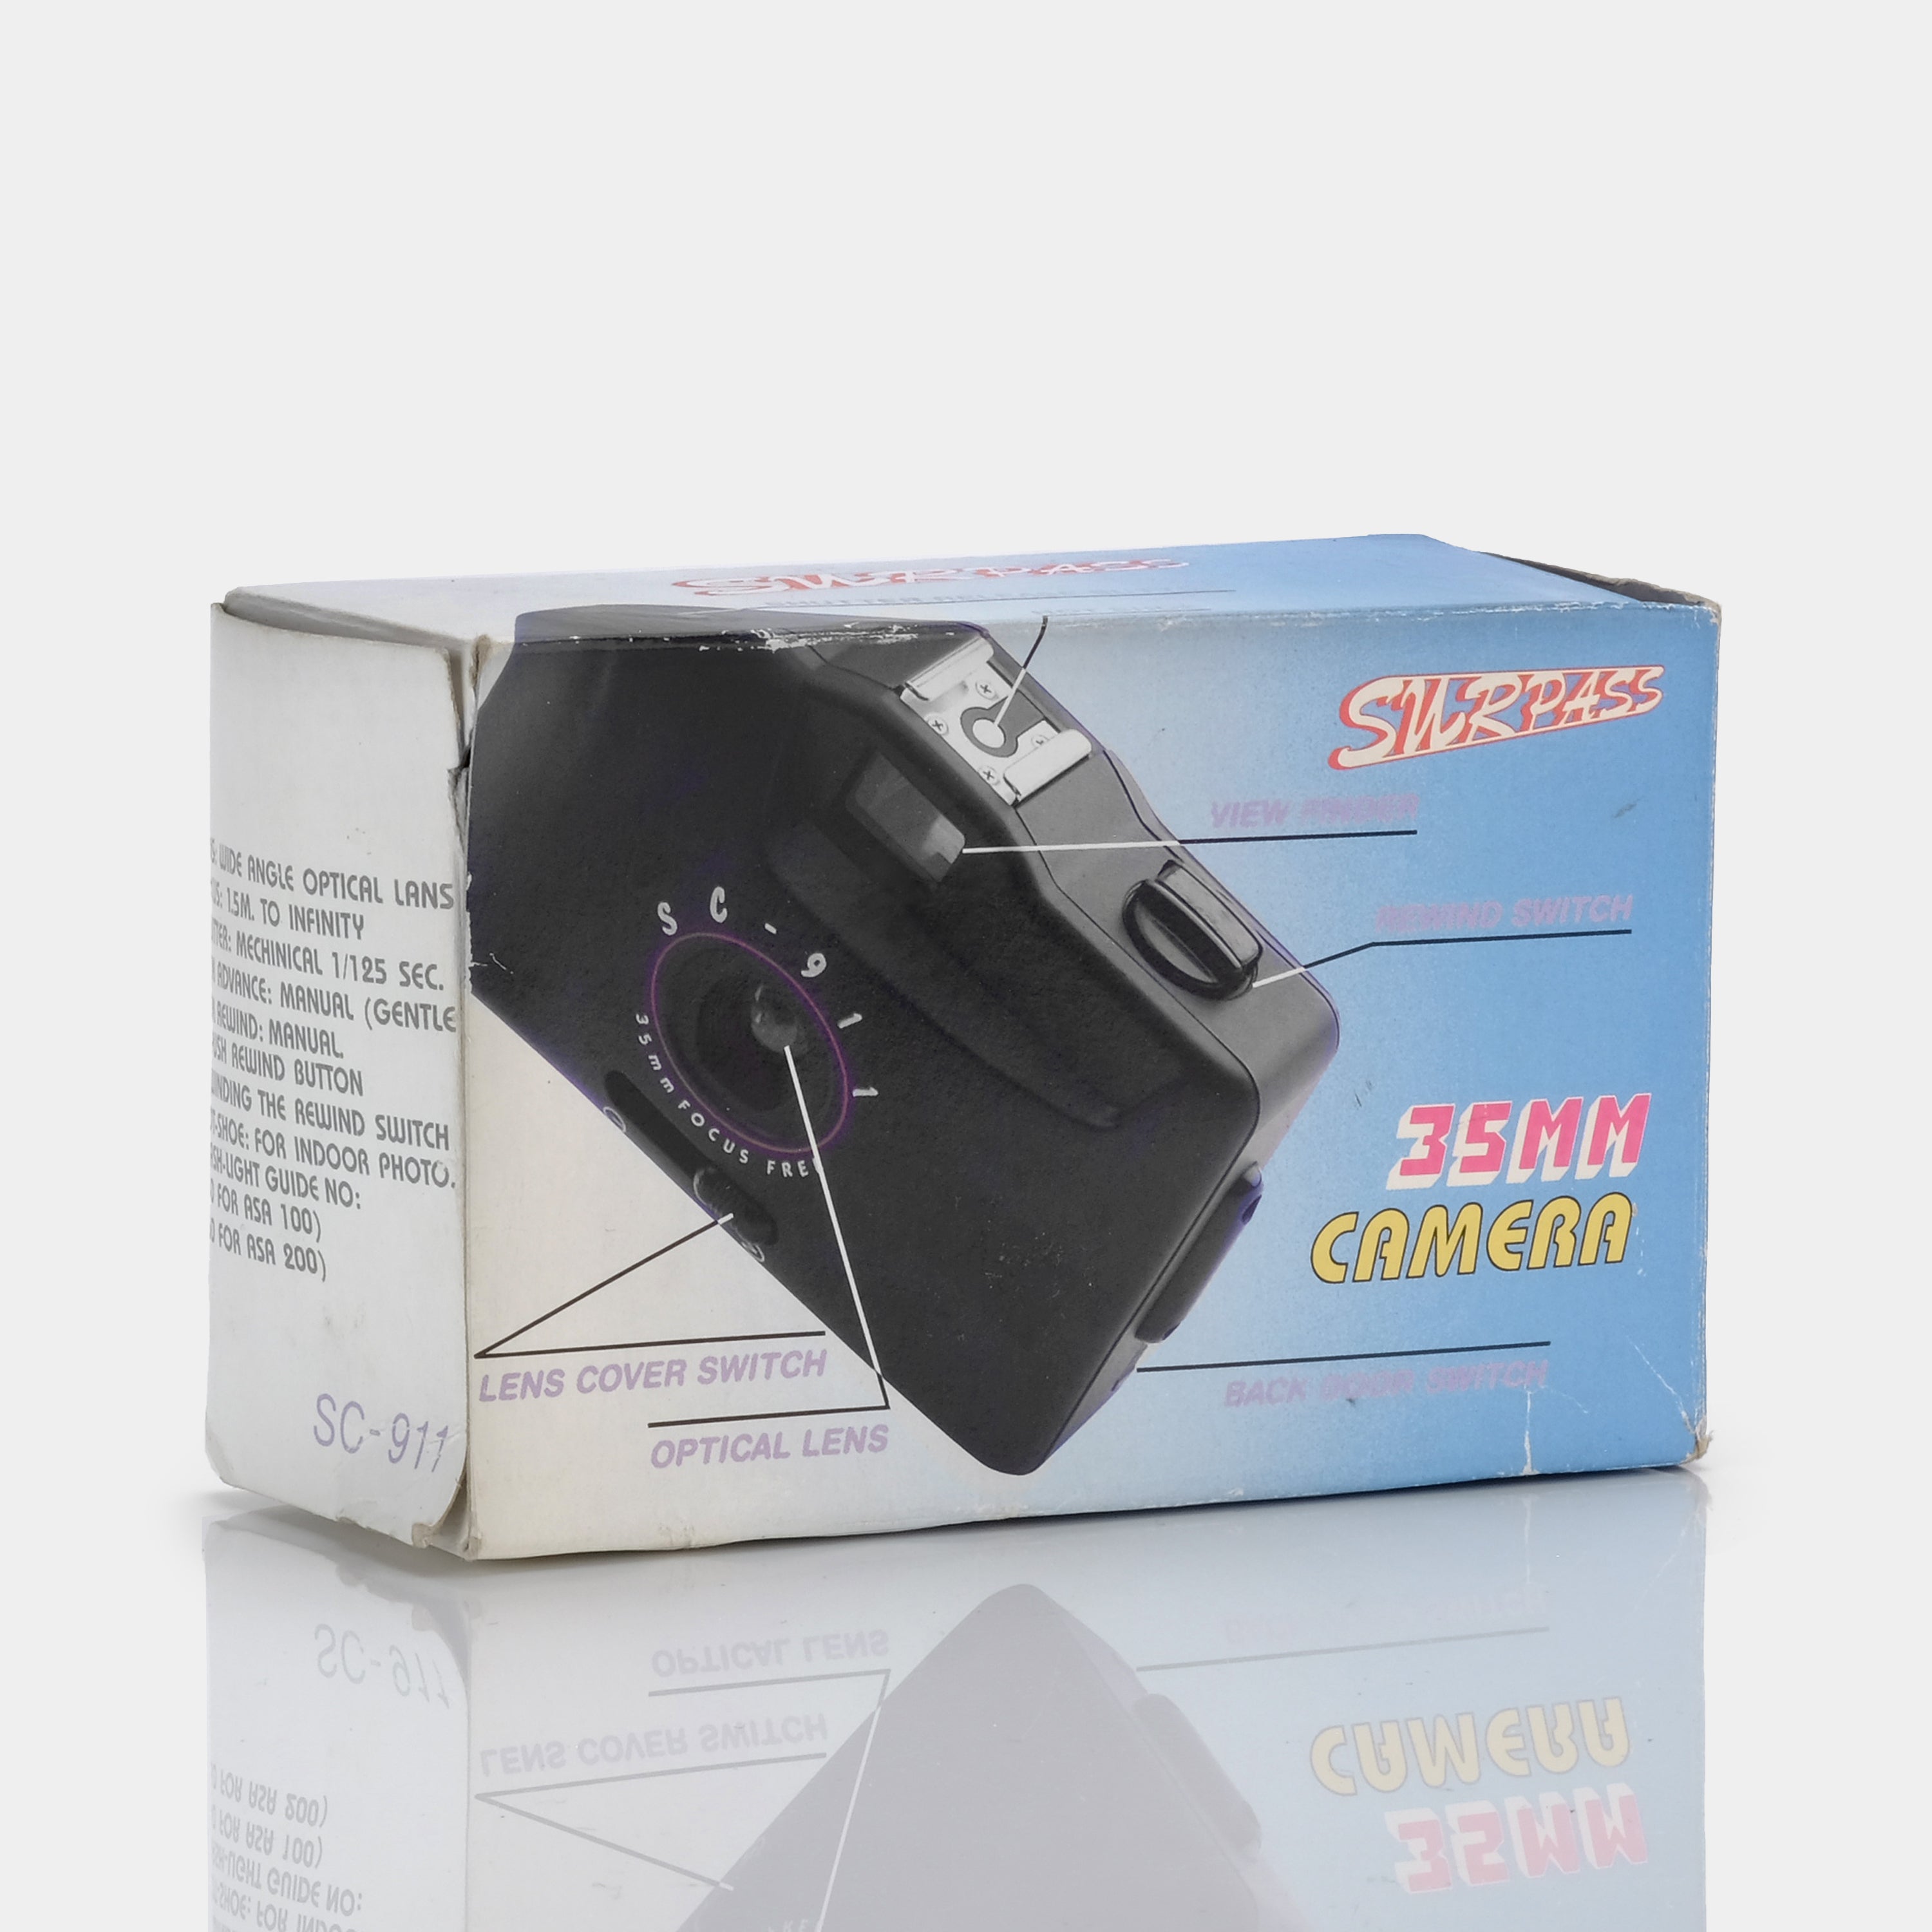 Surpass SC-911 35mm Point and Shoot Film Camera